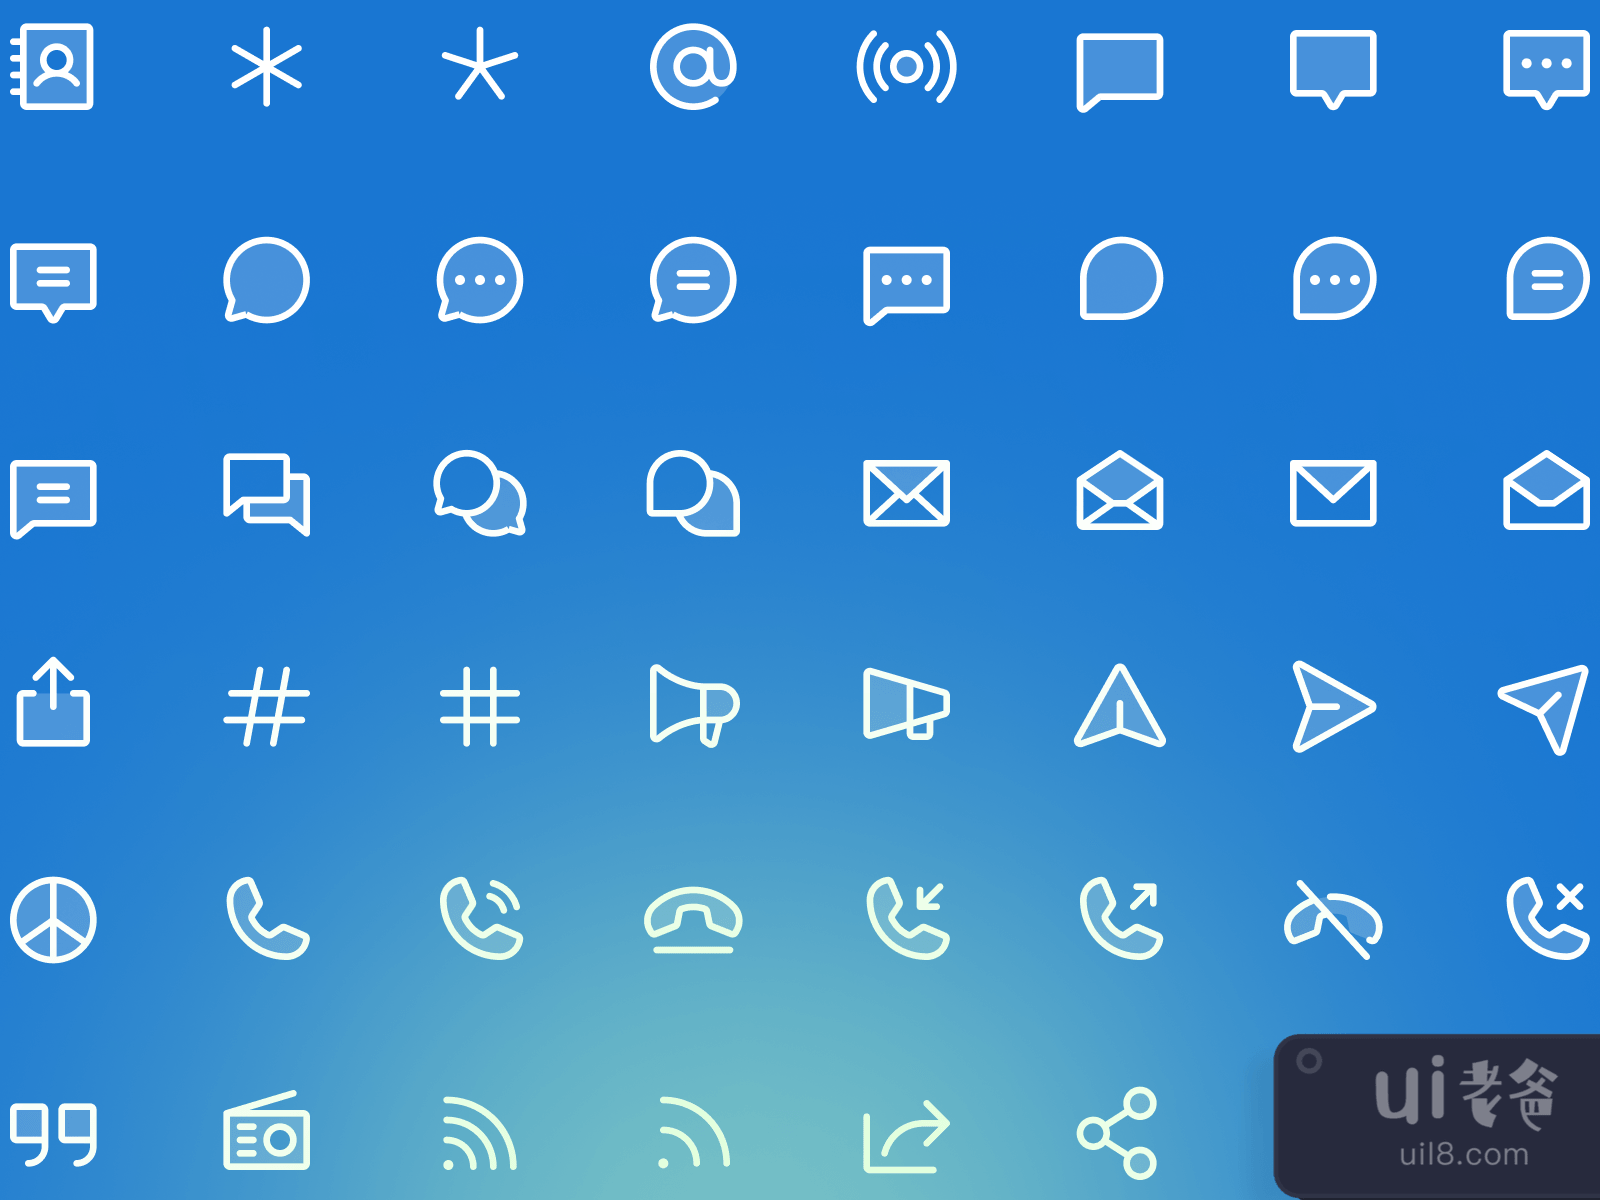 Phosphor Icons for Figma and Adobe XD No 2